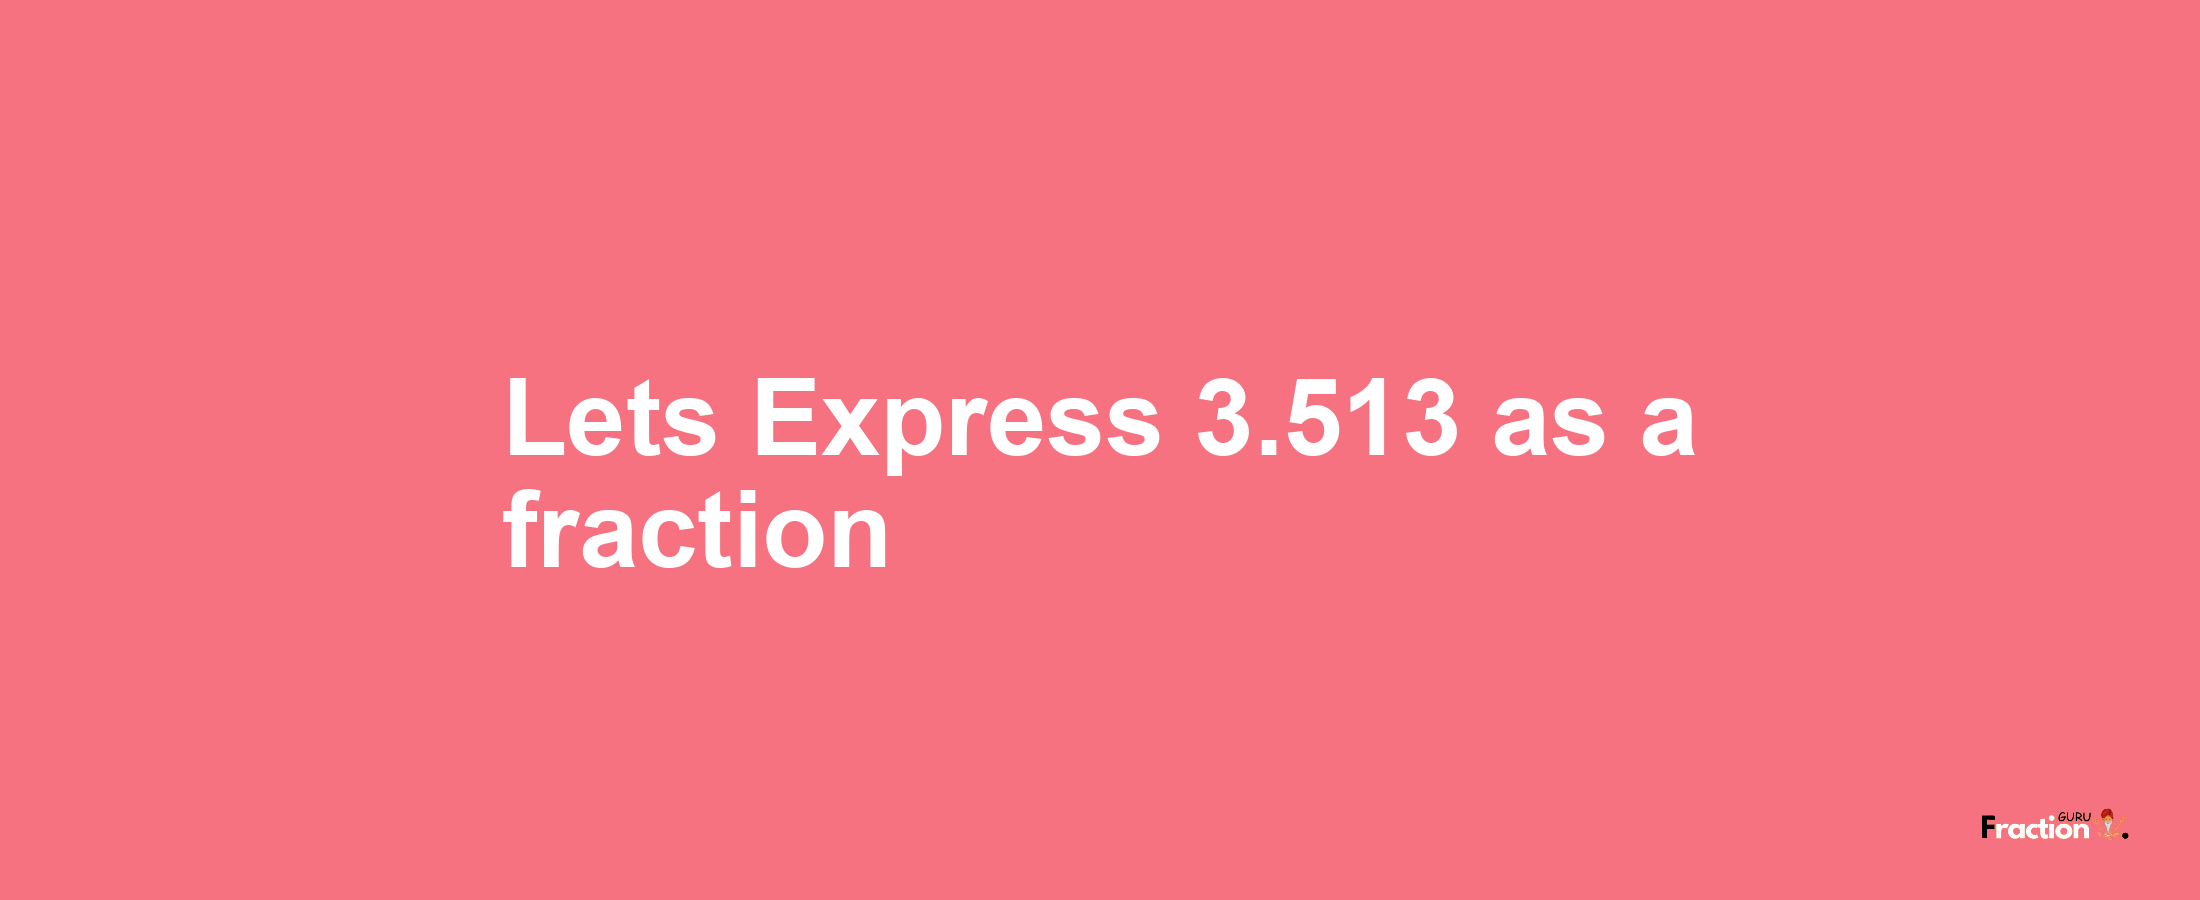 Lets Express 3.513 as afraction